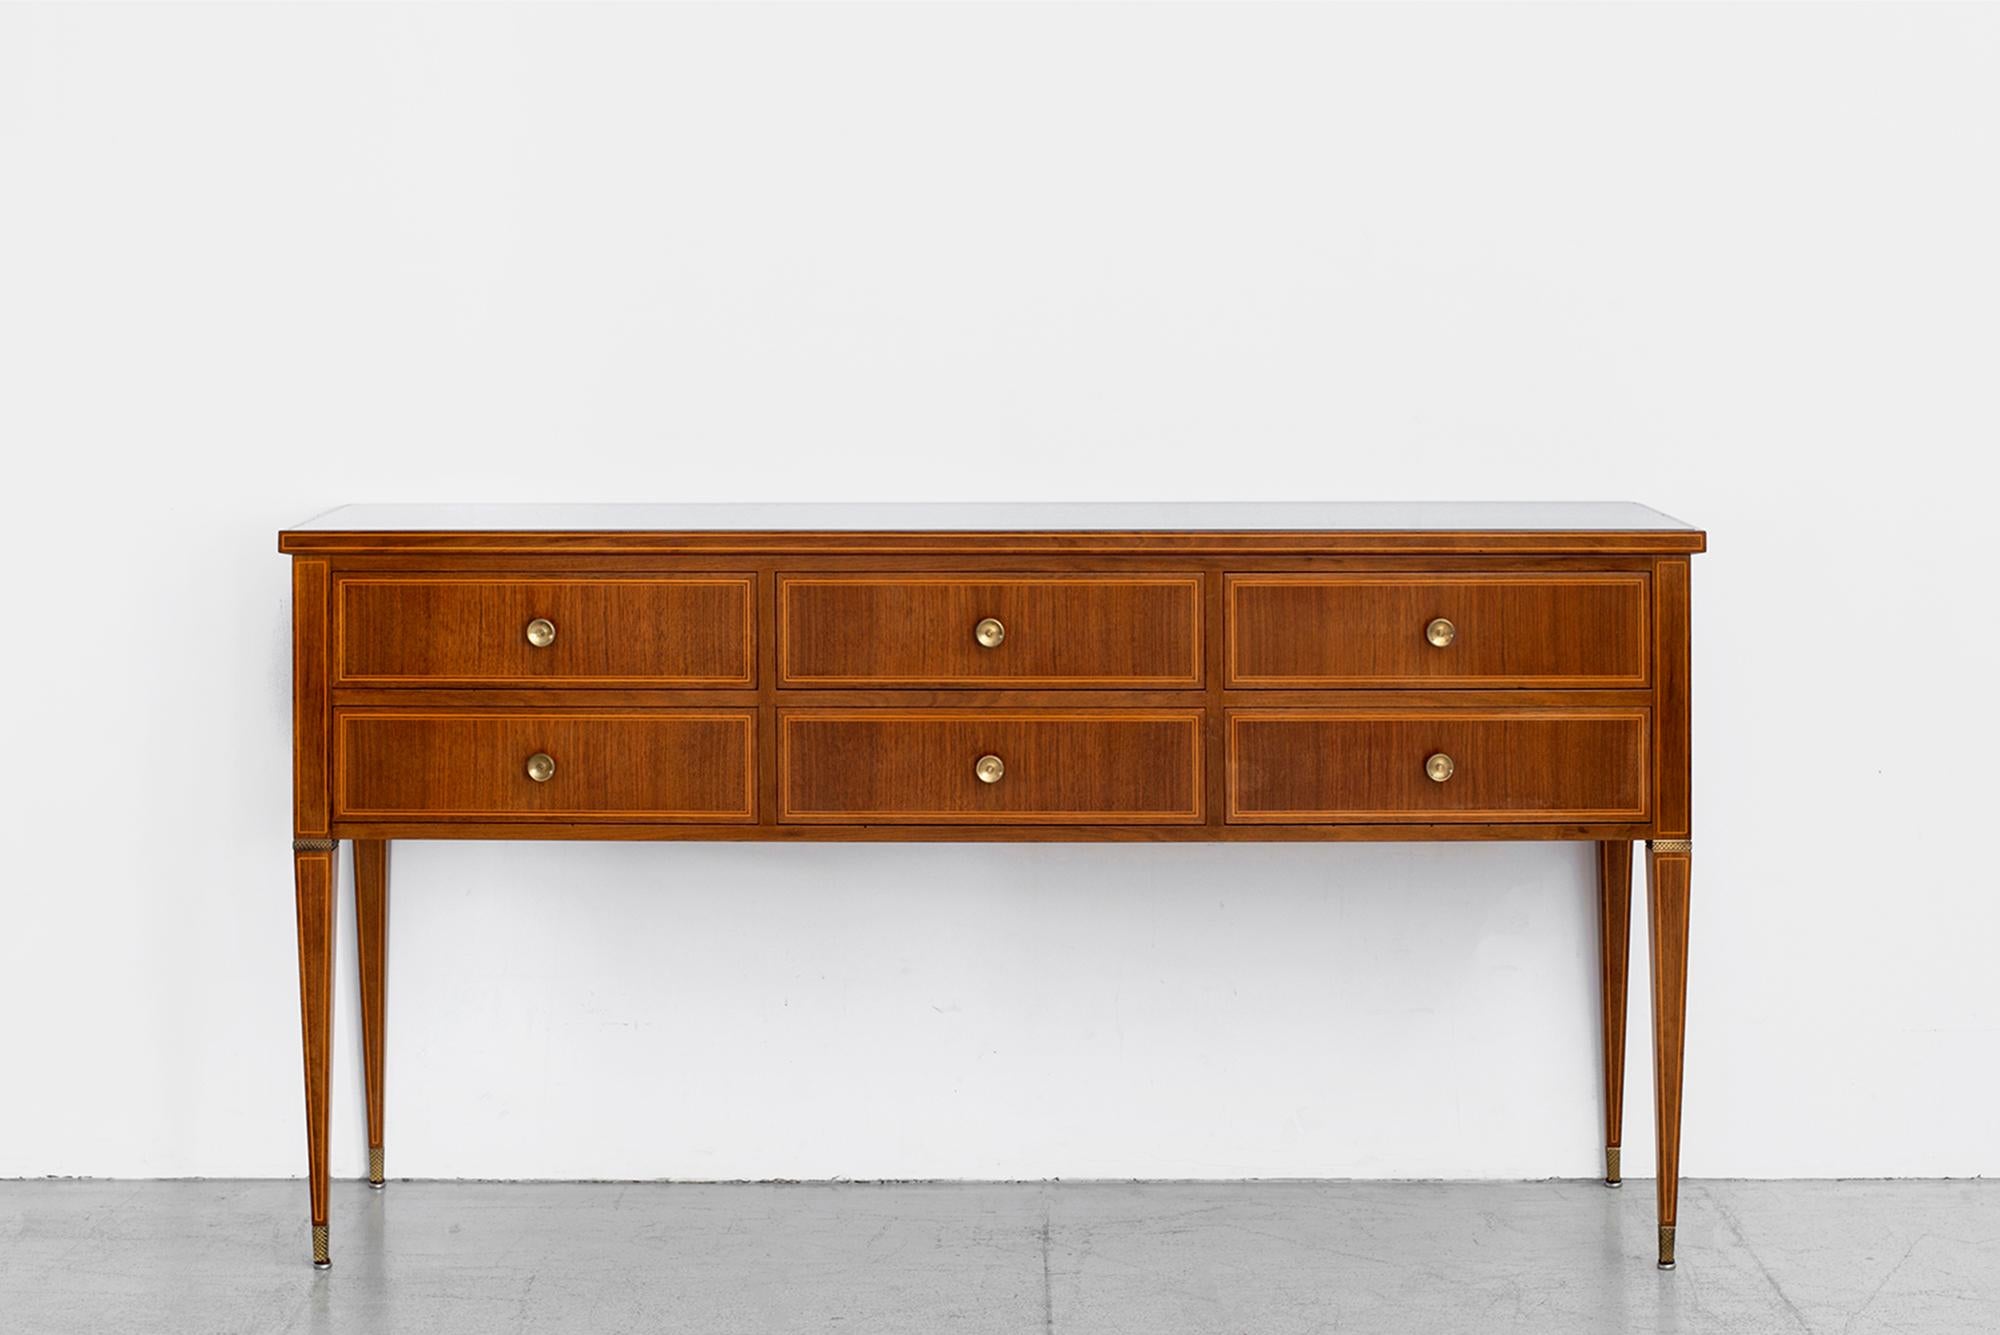 Gorgeous sideboard attributed to Paolo Buffa.
Mahogany wood with black glass top - intricately inlaid wood trim detailing 
Elegant tapered legs, six drawers for storage and ornate brass hardware.
 